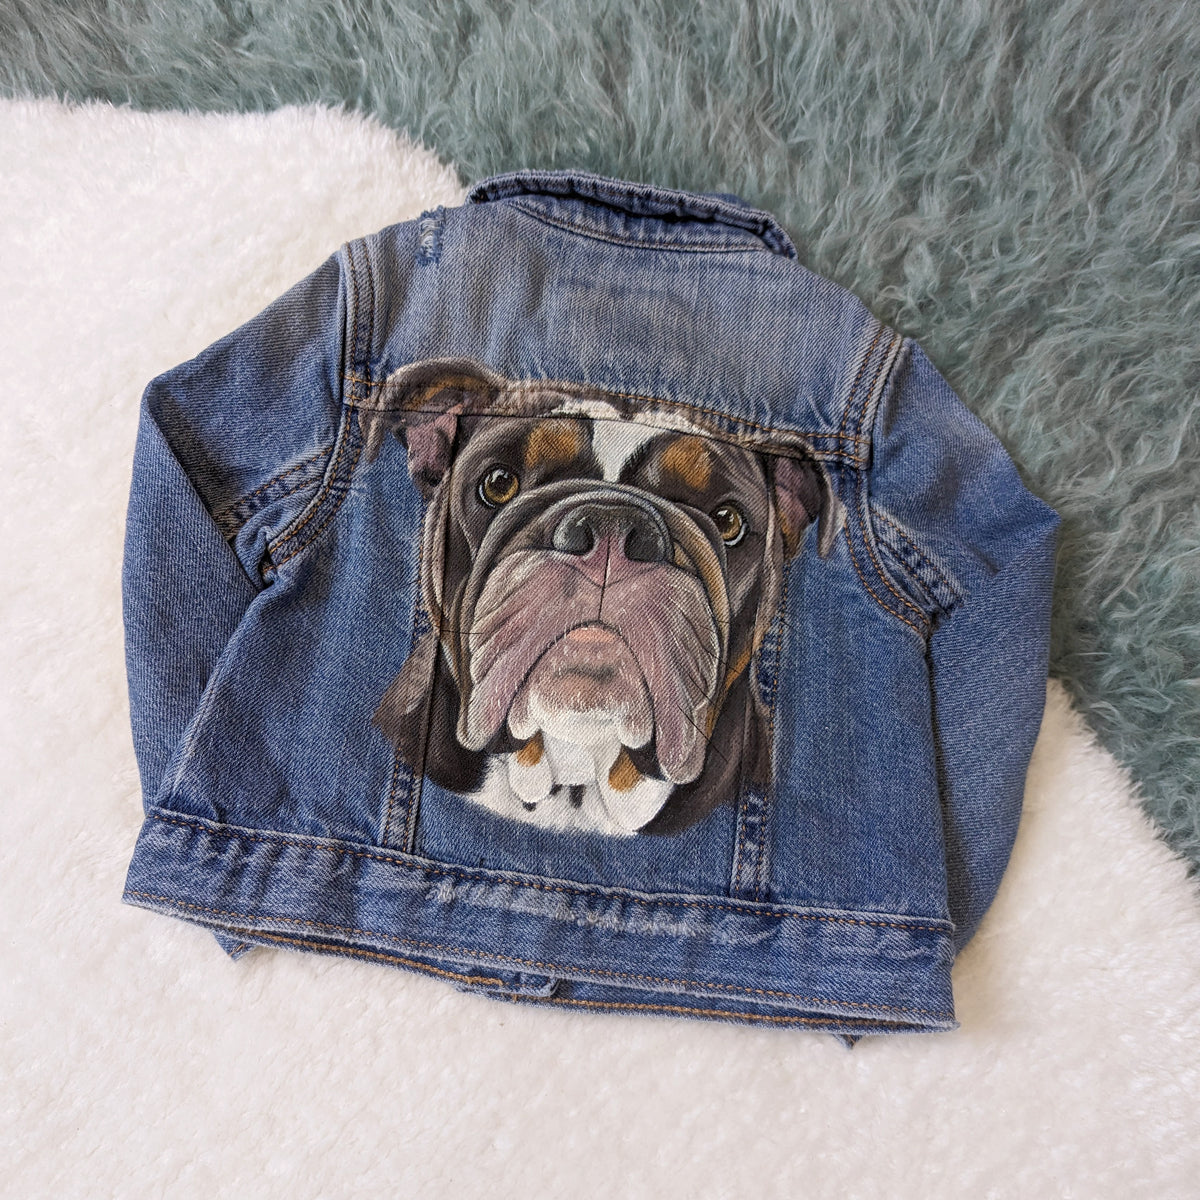 The Little Prince Denim Jacket Hand Painted Jean Jacket for 